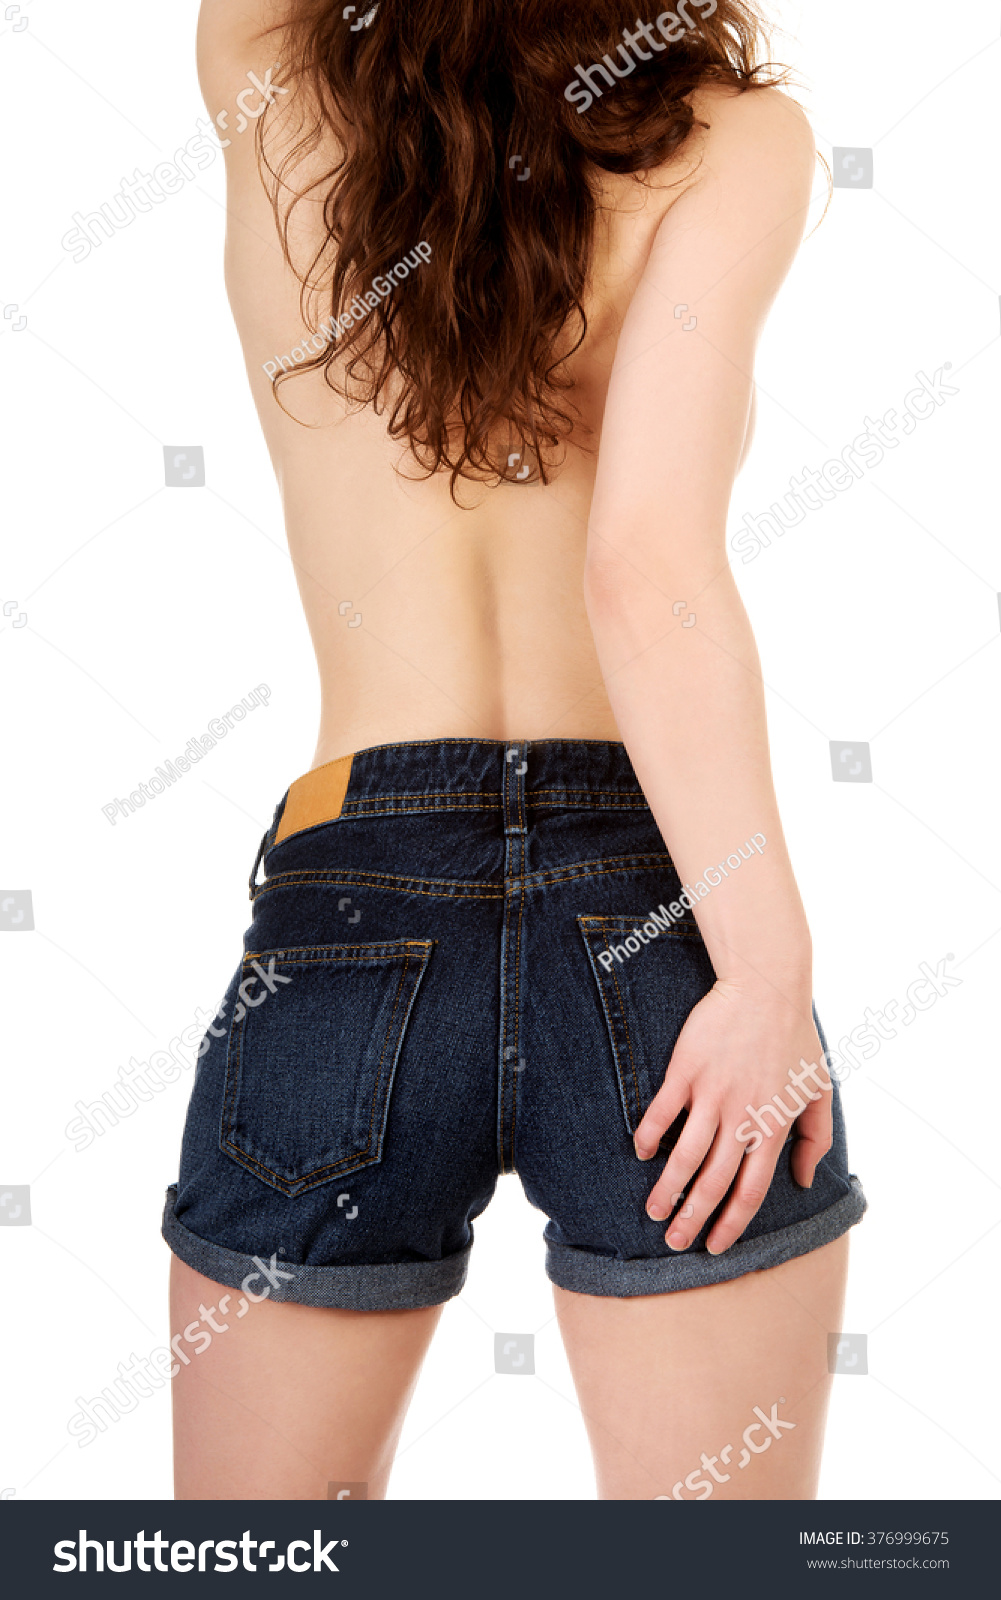 Shirtless Woman Jeans Shorts Stock Photo Shutterstock